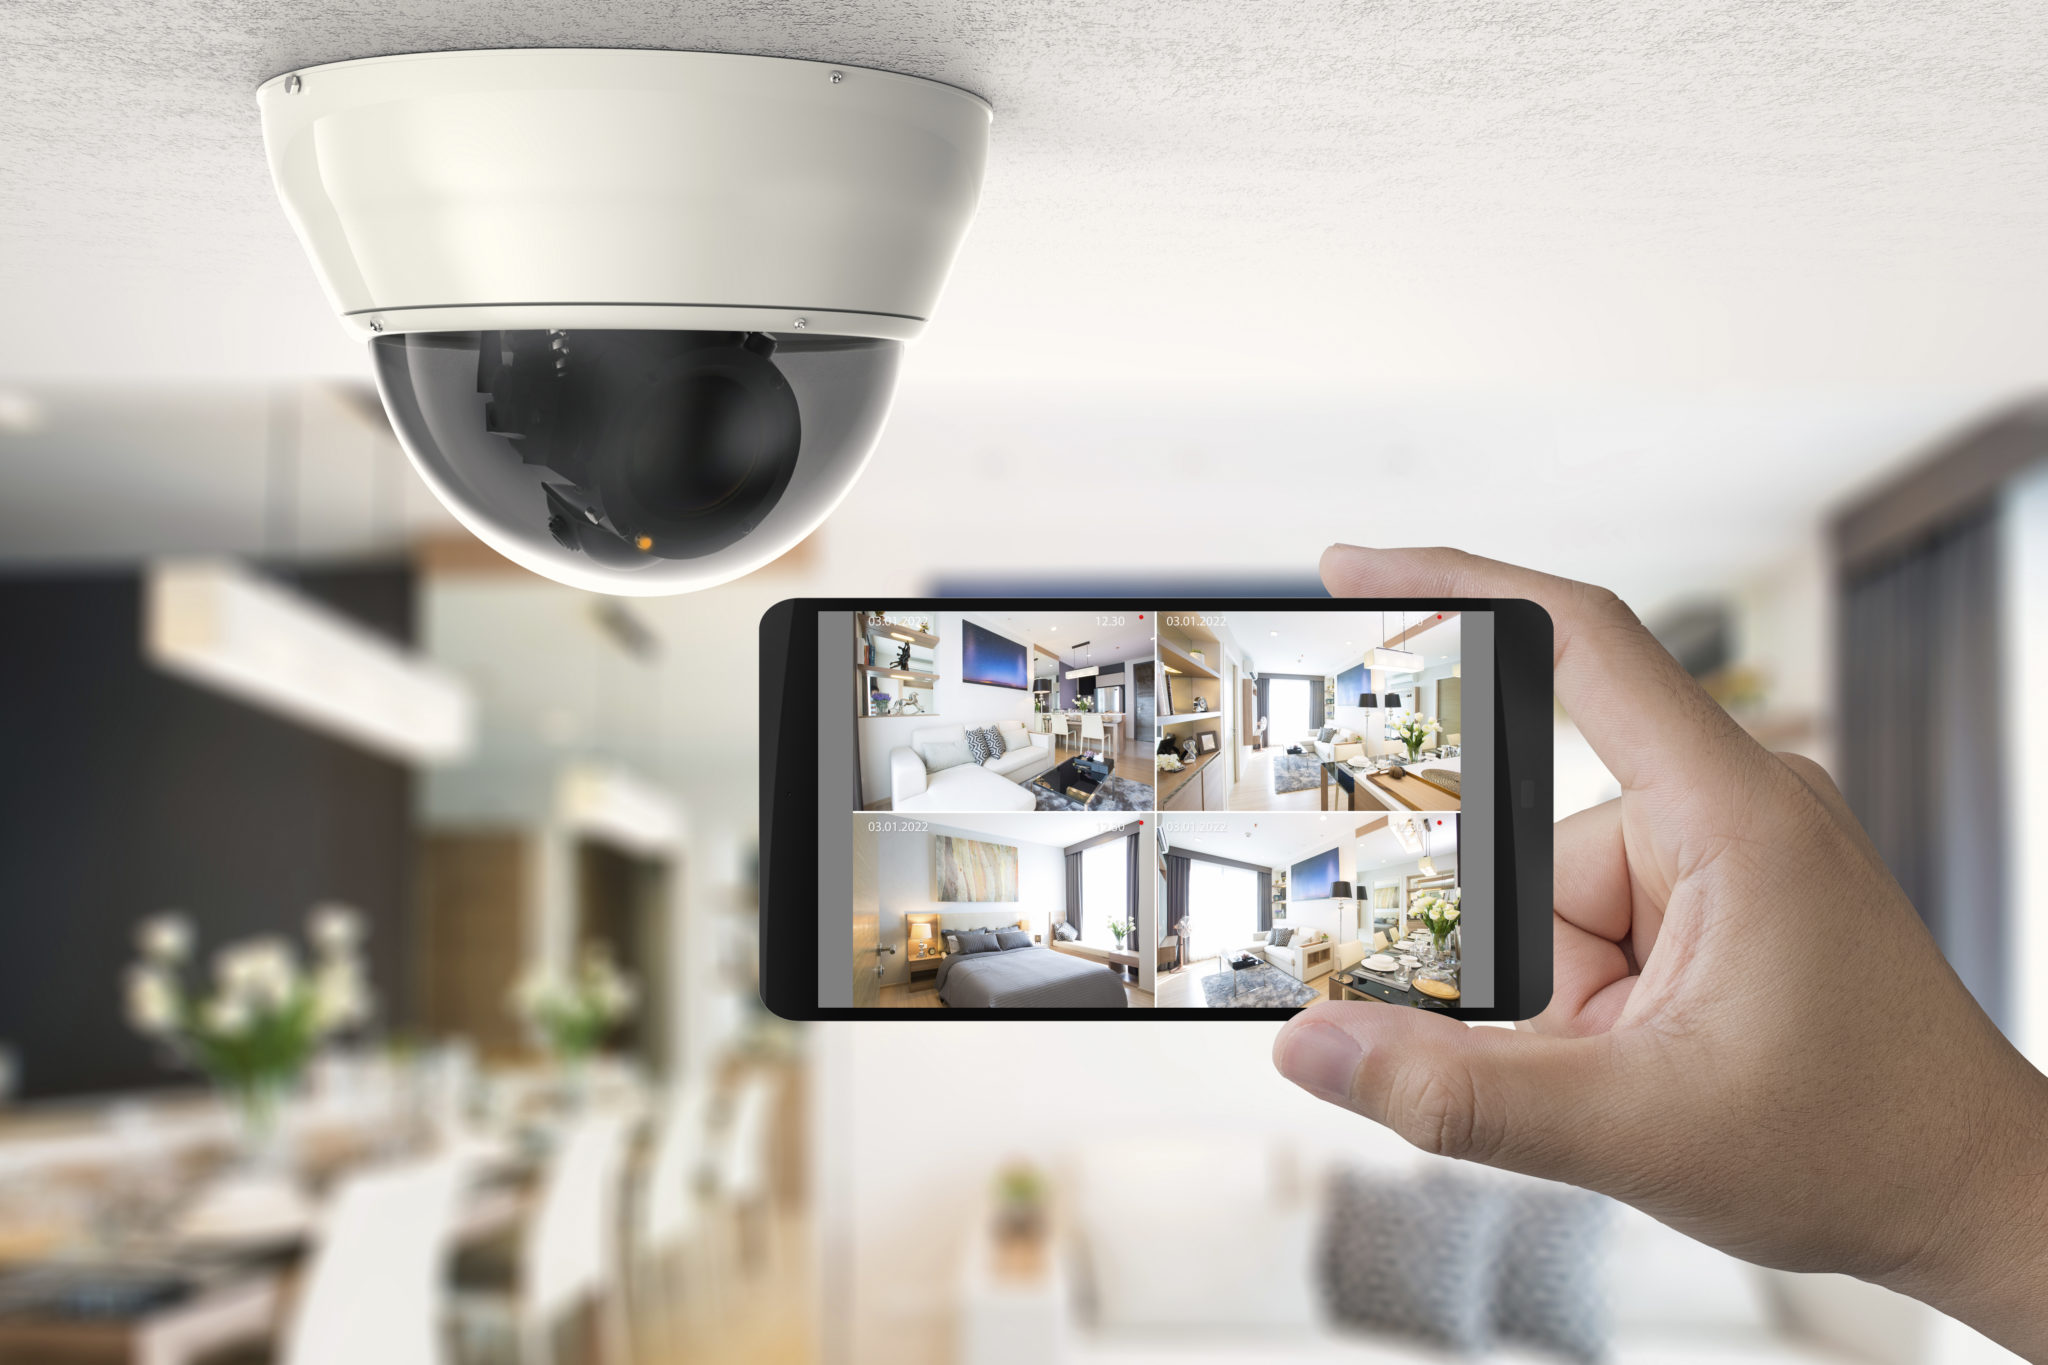 home security cameras pairing